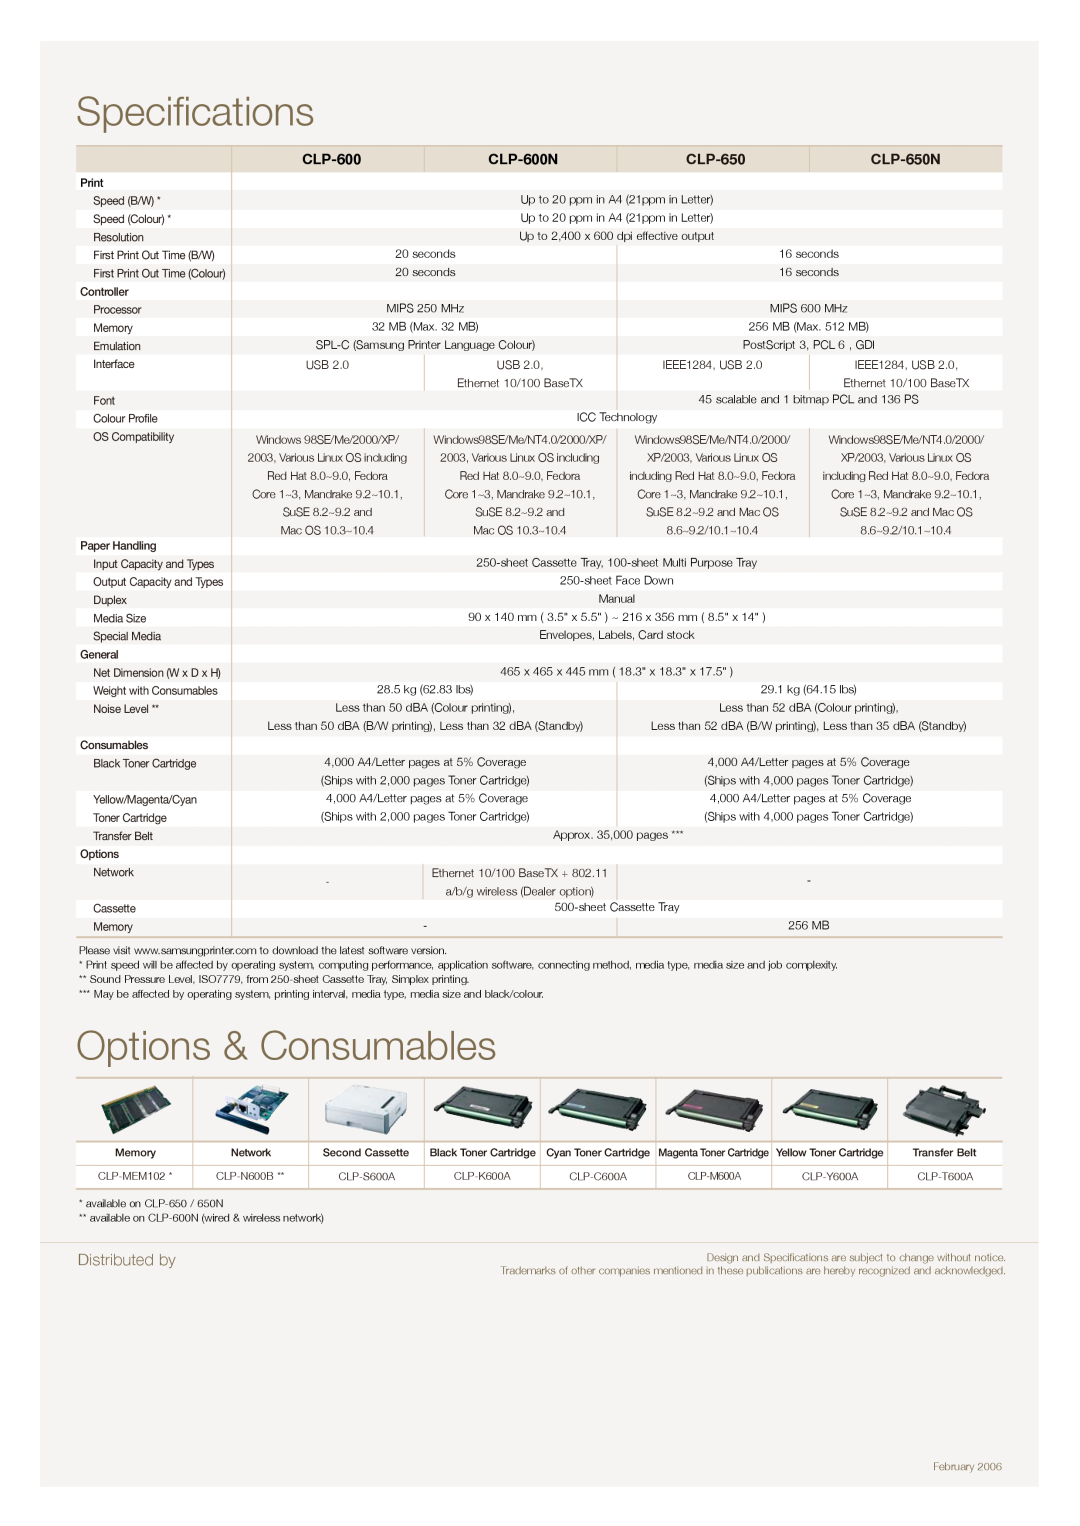 Samsung specifications Specifications, Options & Consumables, Distributed by, CLP-600N, CLP-650N 